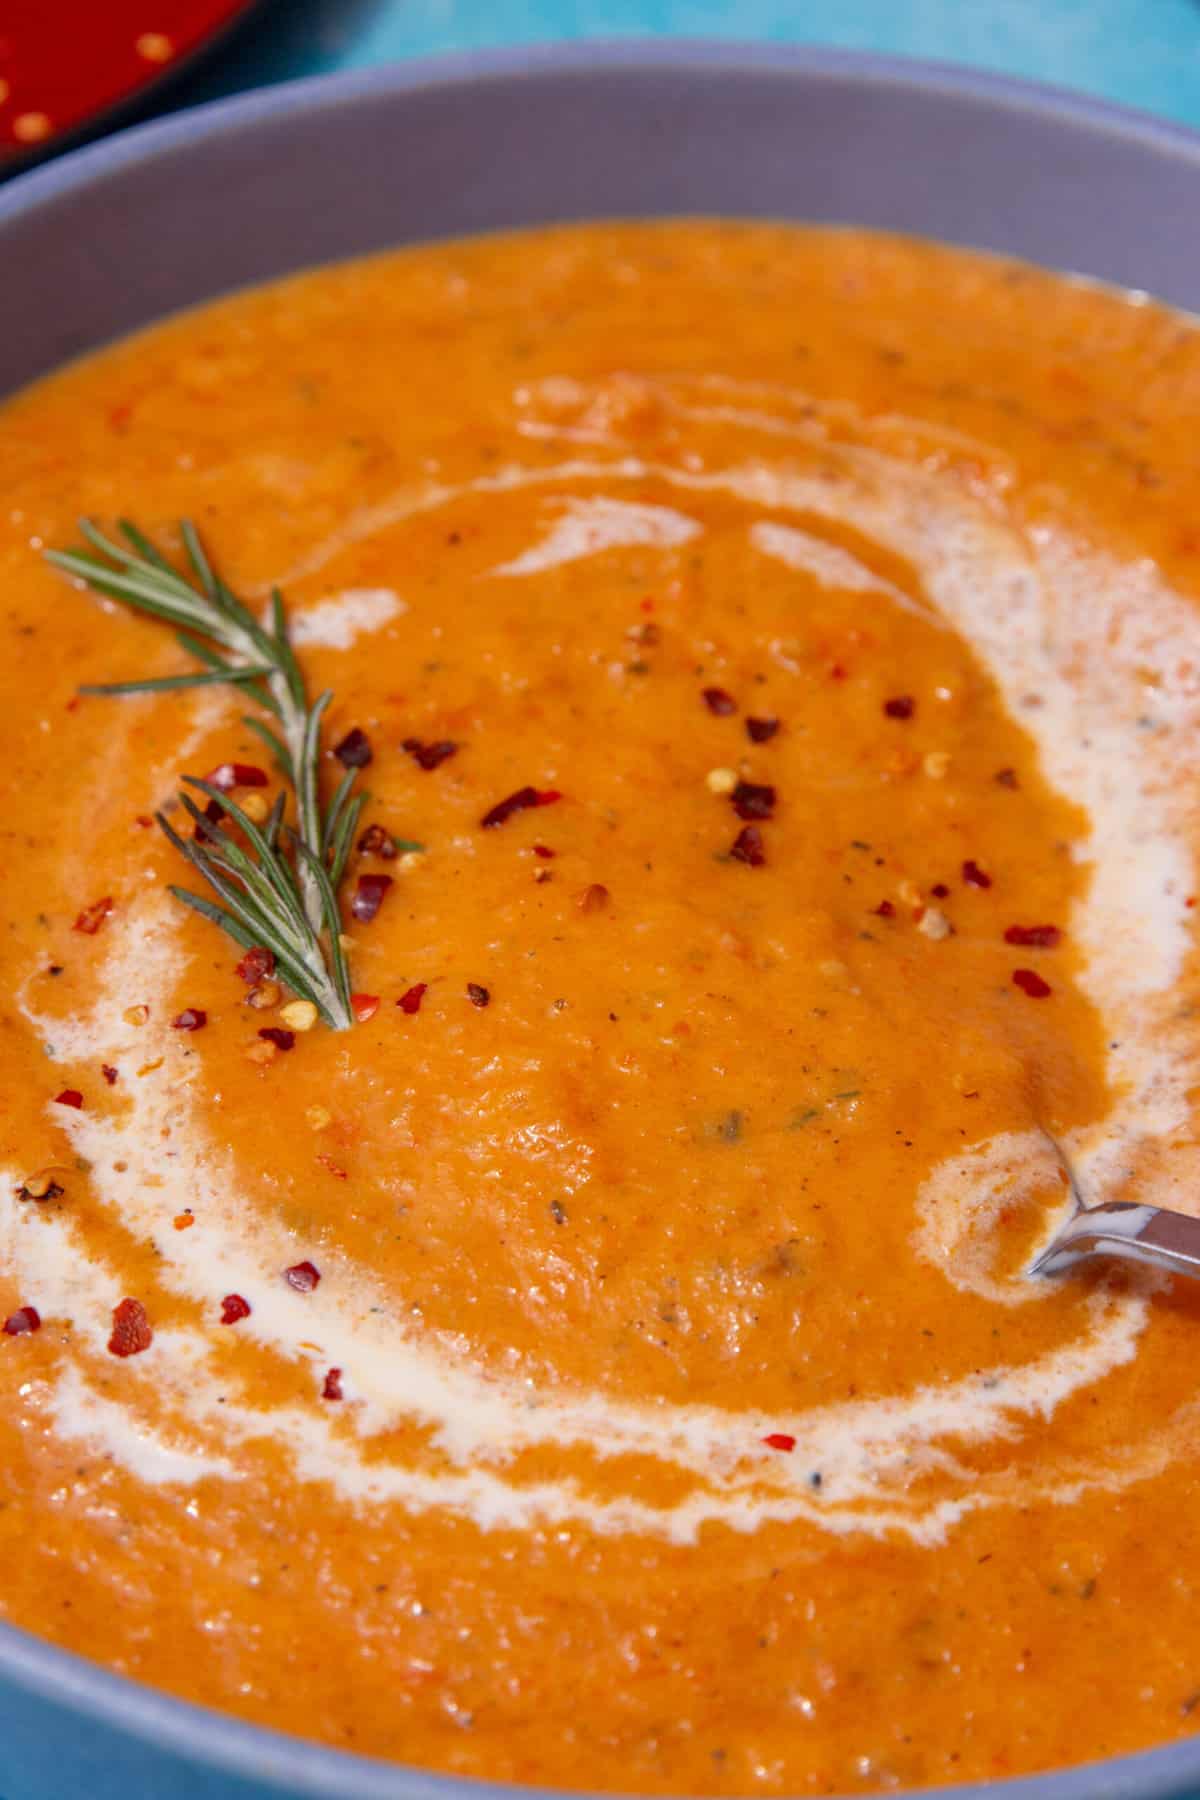 A blue bowl with an orangey thick vegetable soup with a swirl of cream, and topped with some chilli flakes and fresh rosemary.